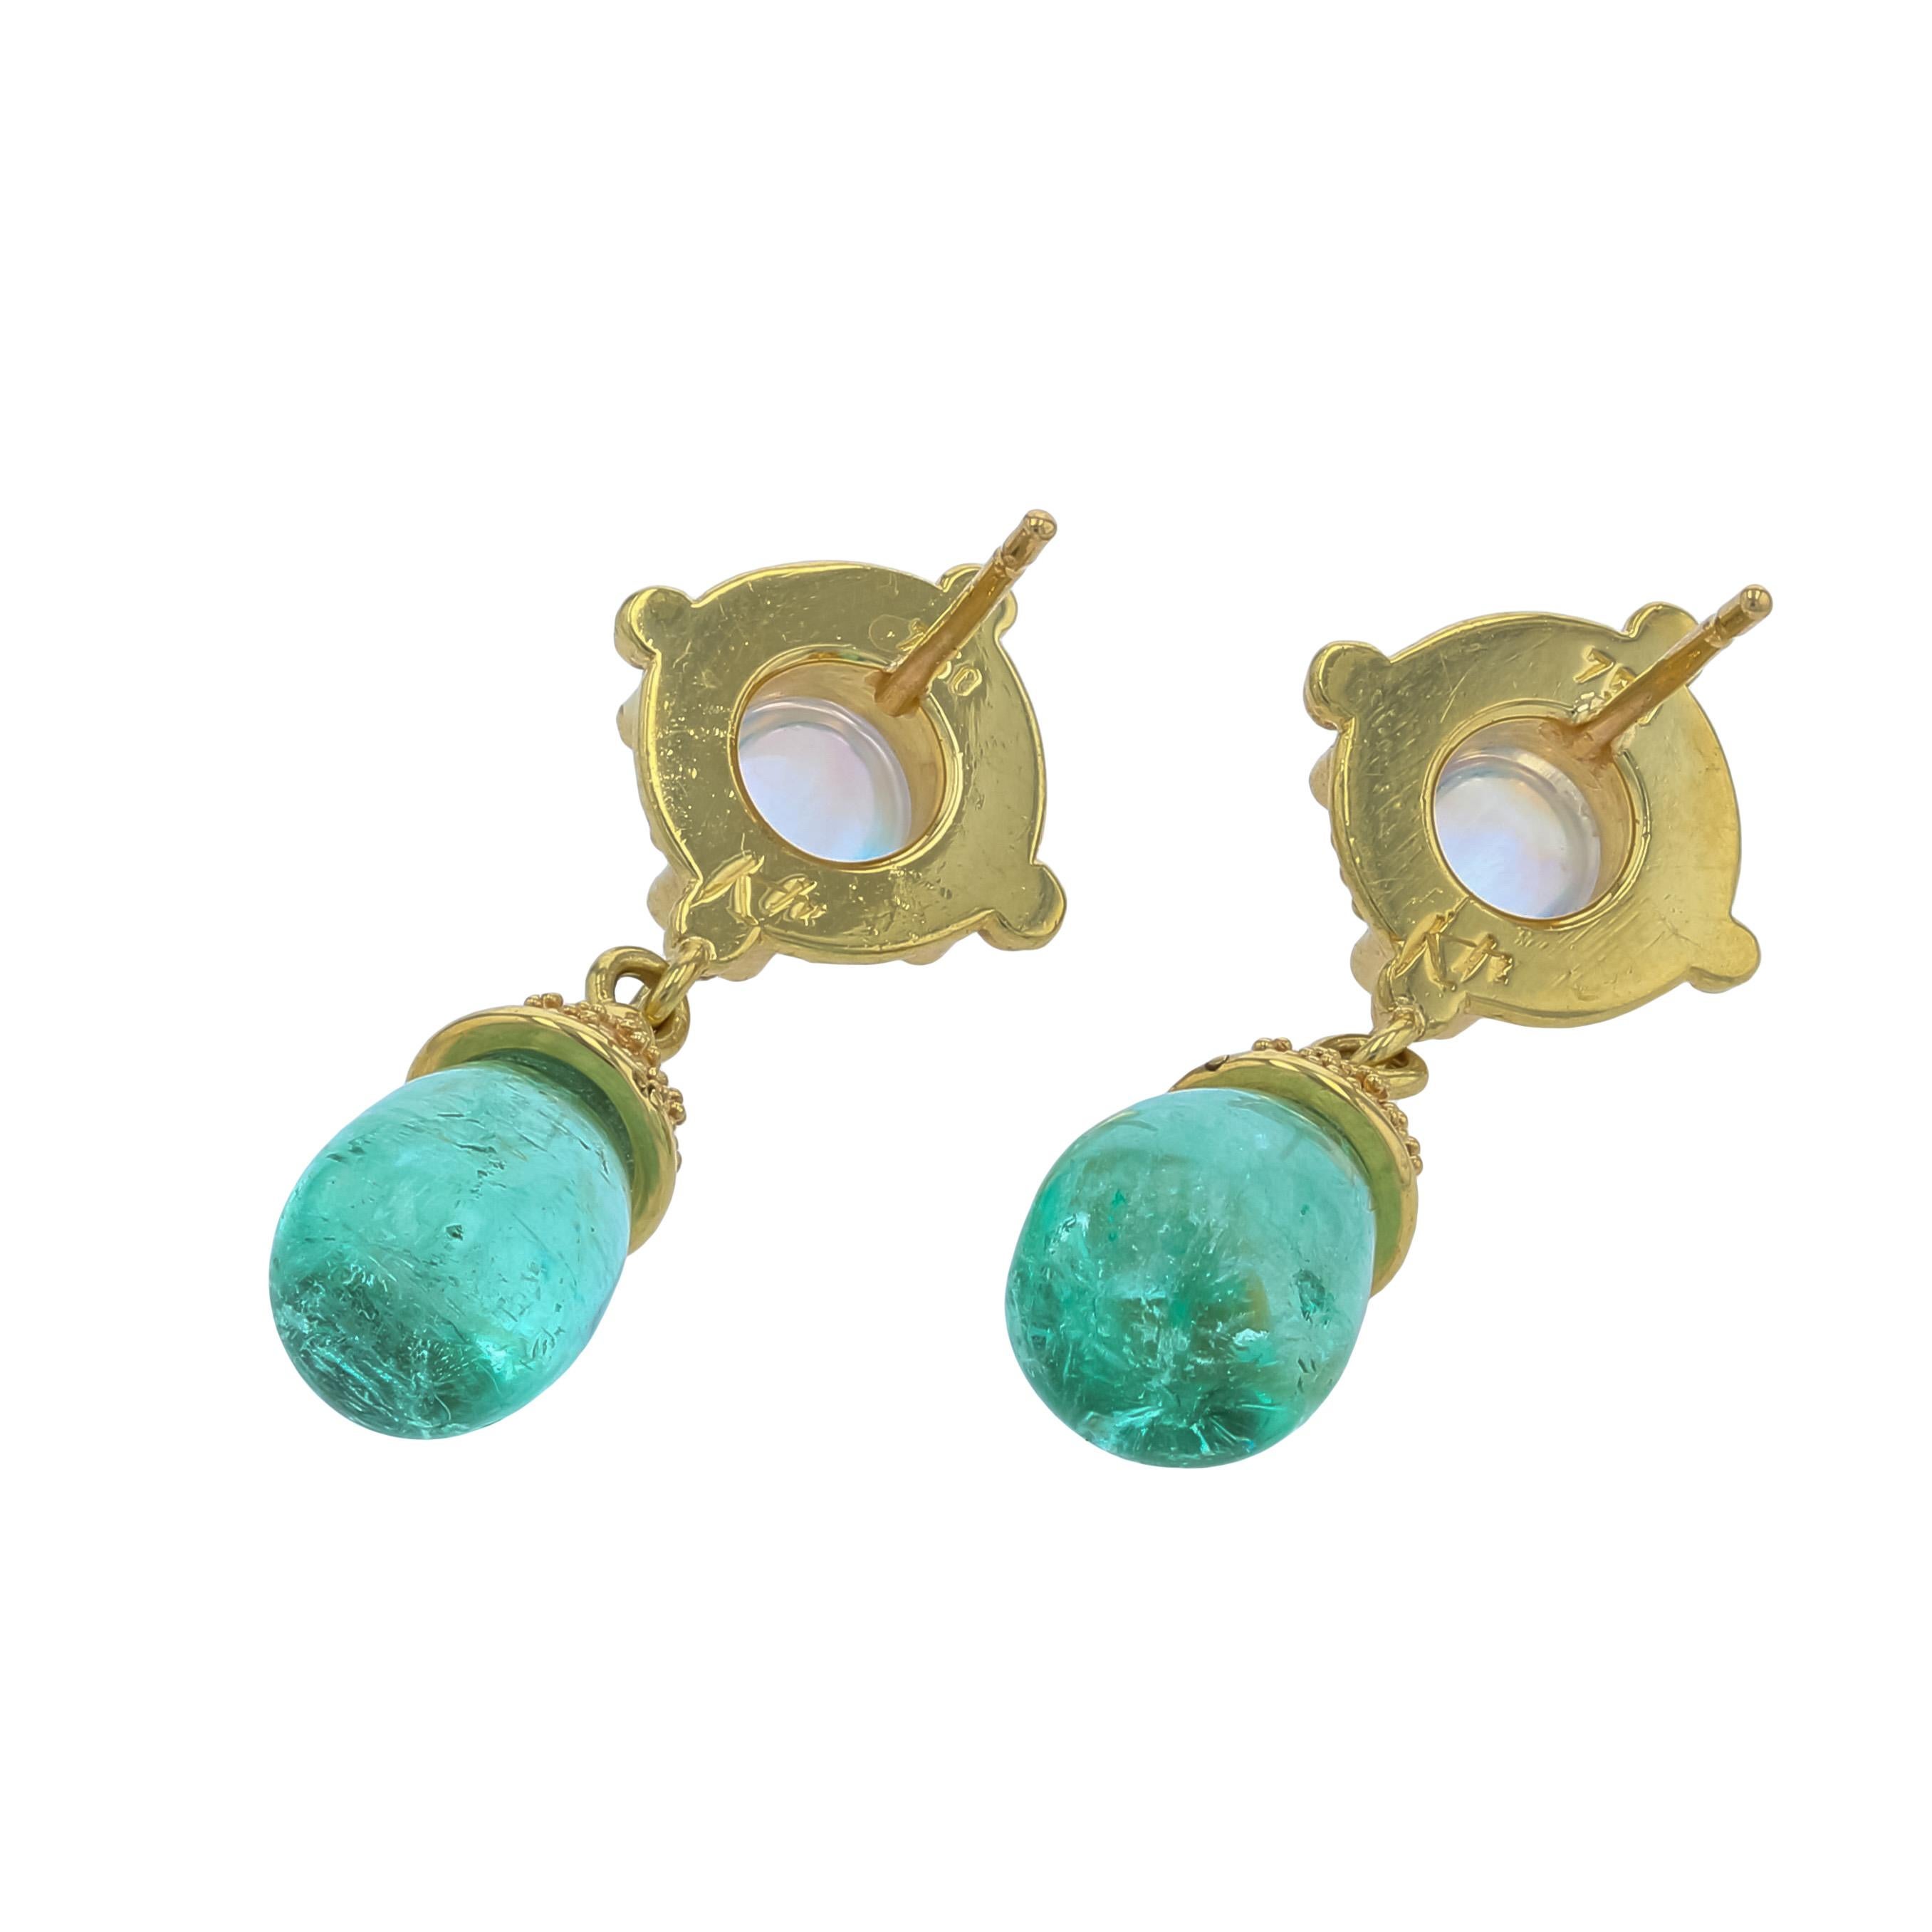 Contemporary Kent Raible 18 Karat Gold Moonstone Dangle Earrings with Emerald and Granulation